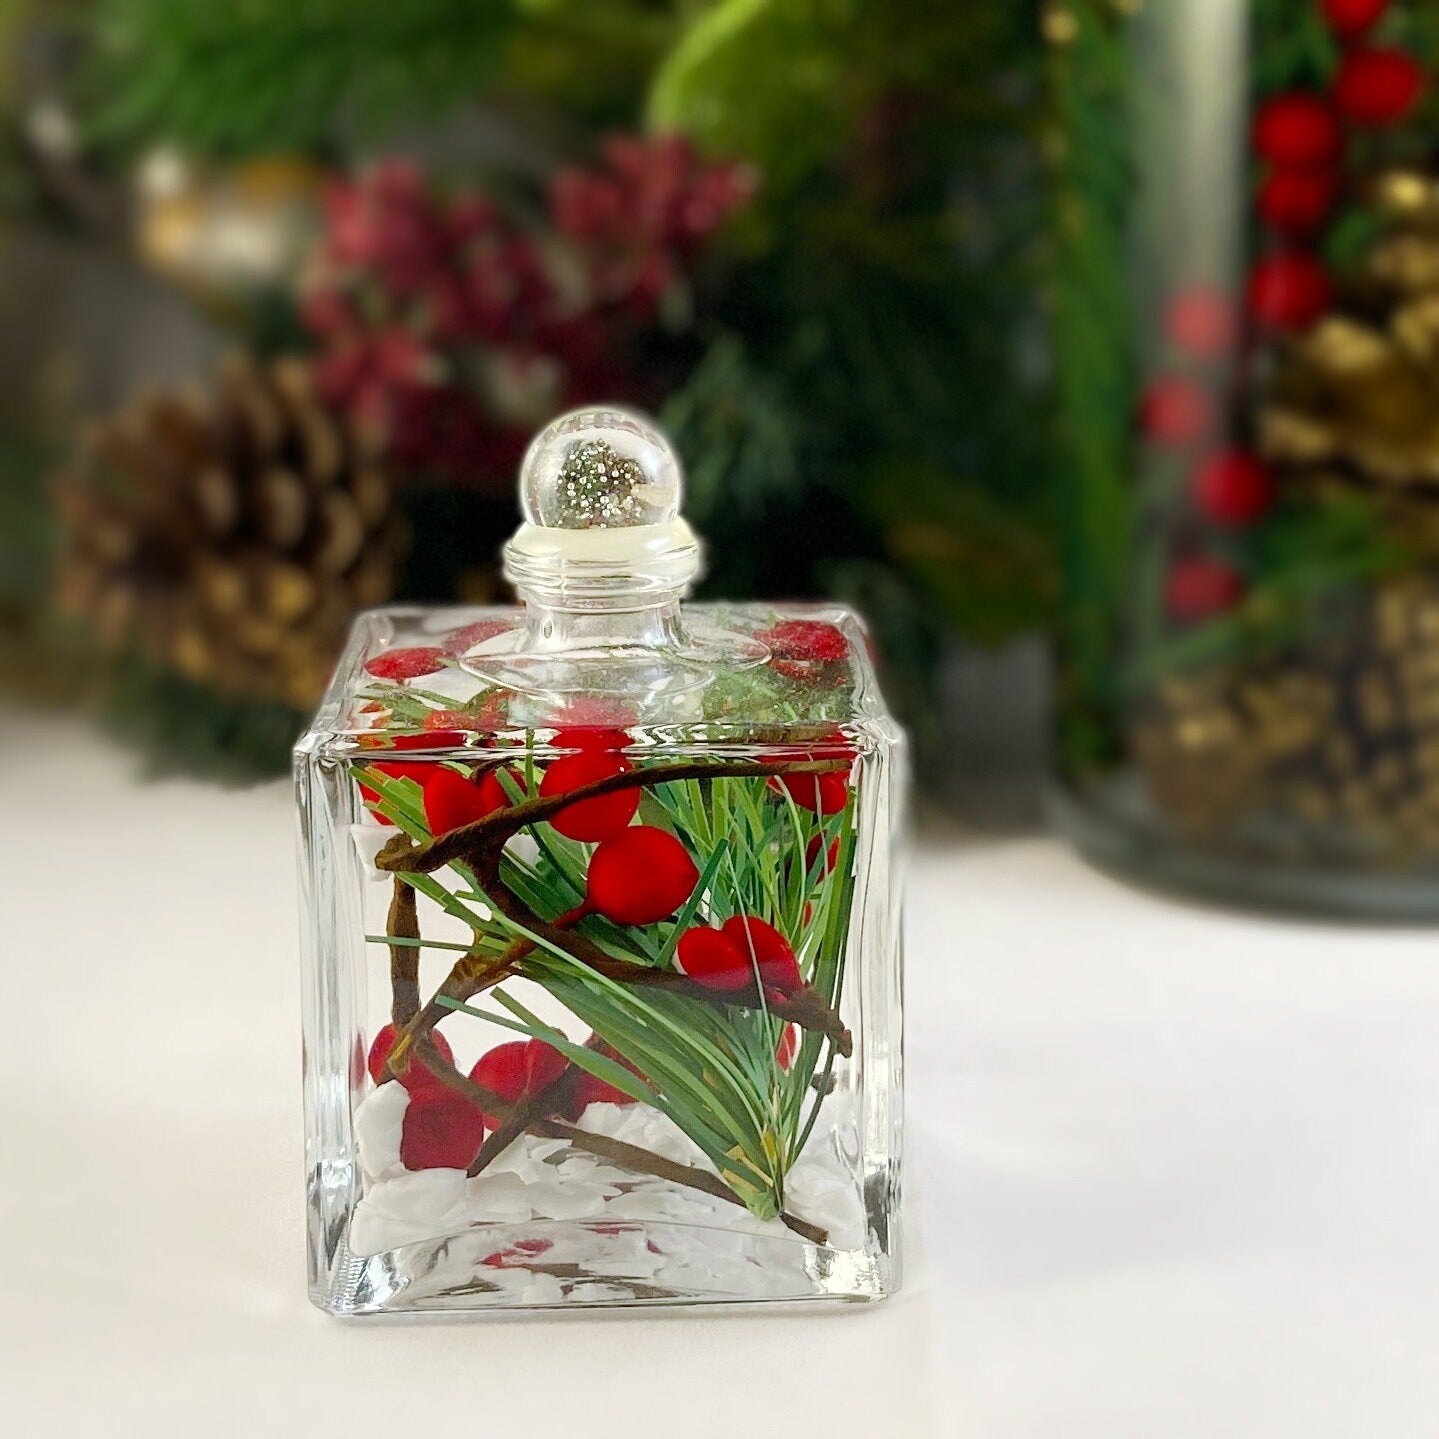 Liquid Candle with Holly berries, Small Square Liquid Candle/Holiday Decor - Handmade in USA - Long Burn Time